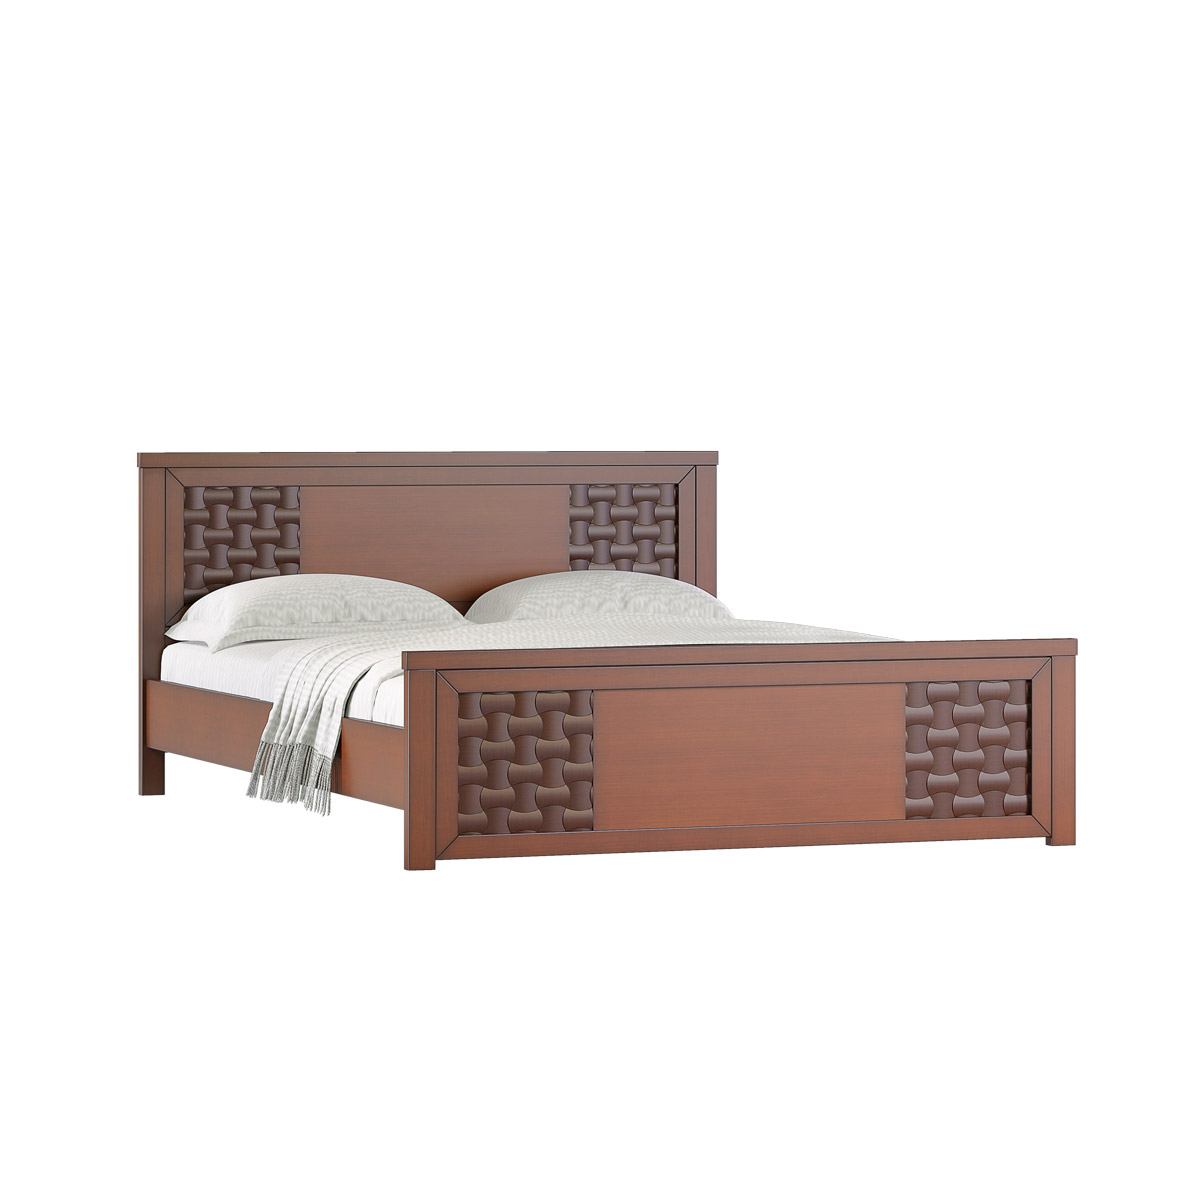 Wooden double bed I BDH-366-3-1-20